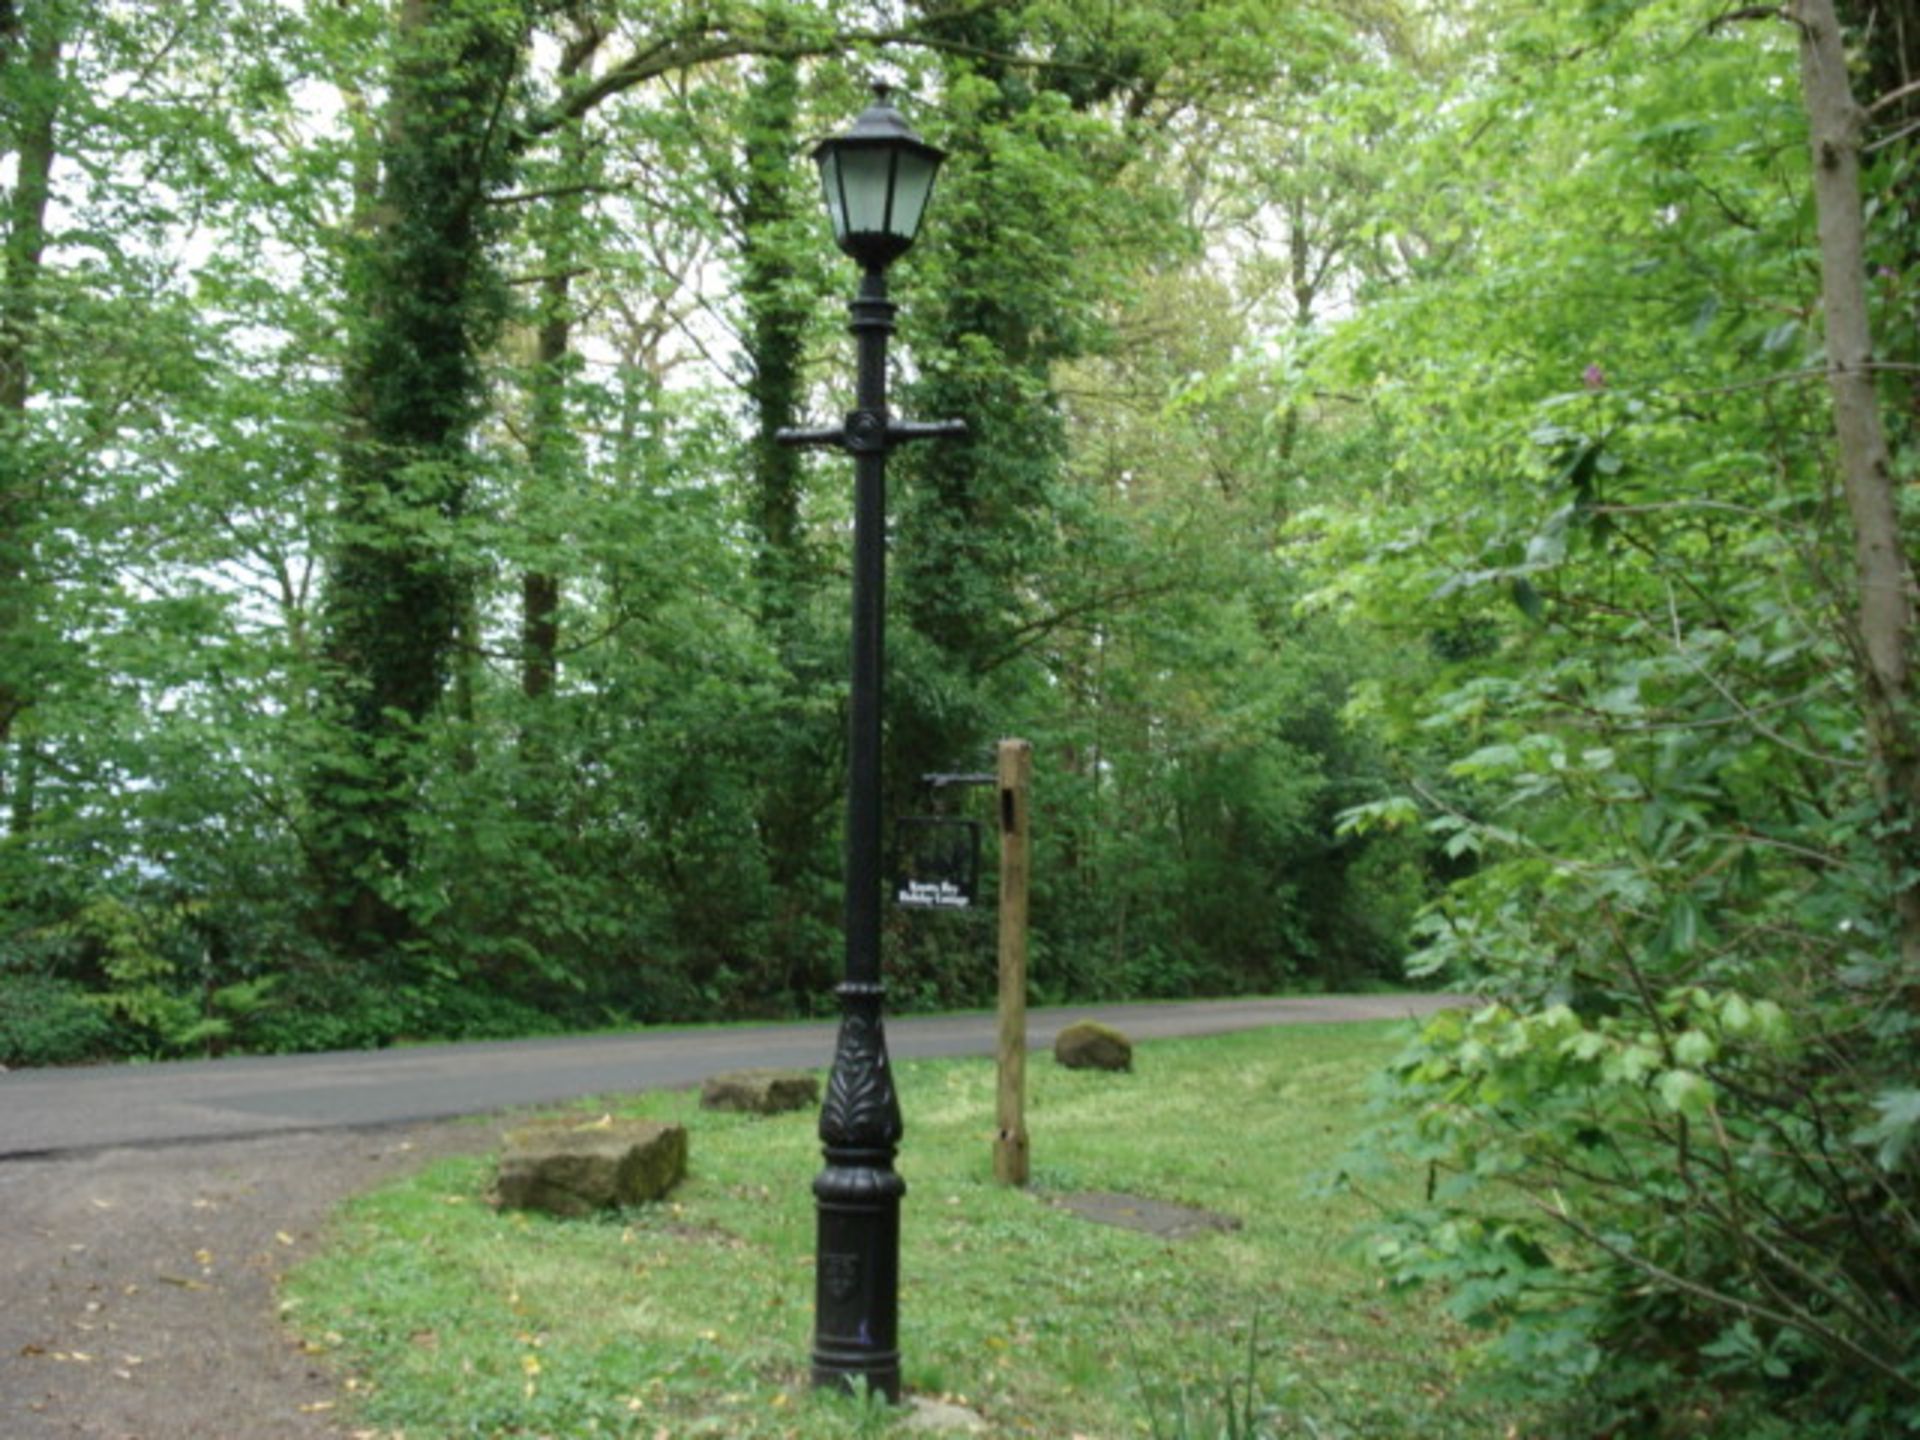 NEW UNUSED CAST IRON VICTORIAN STYLE LAMP POST WITH LADDER BARS AND MATCHING CAST IRON GLAZED